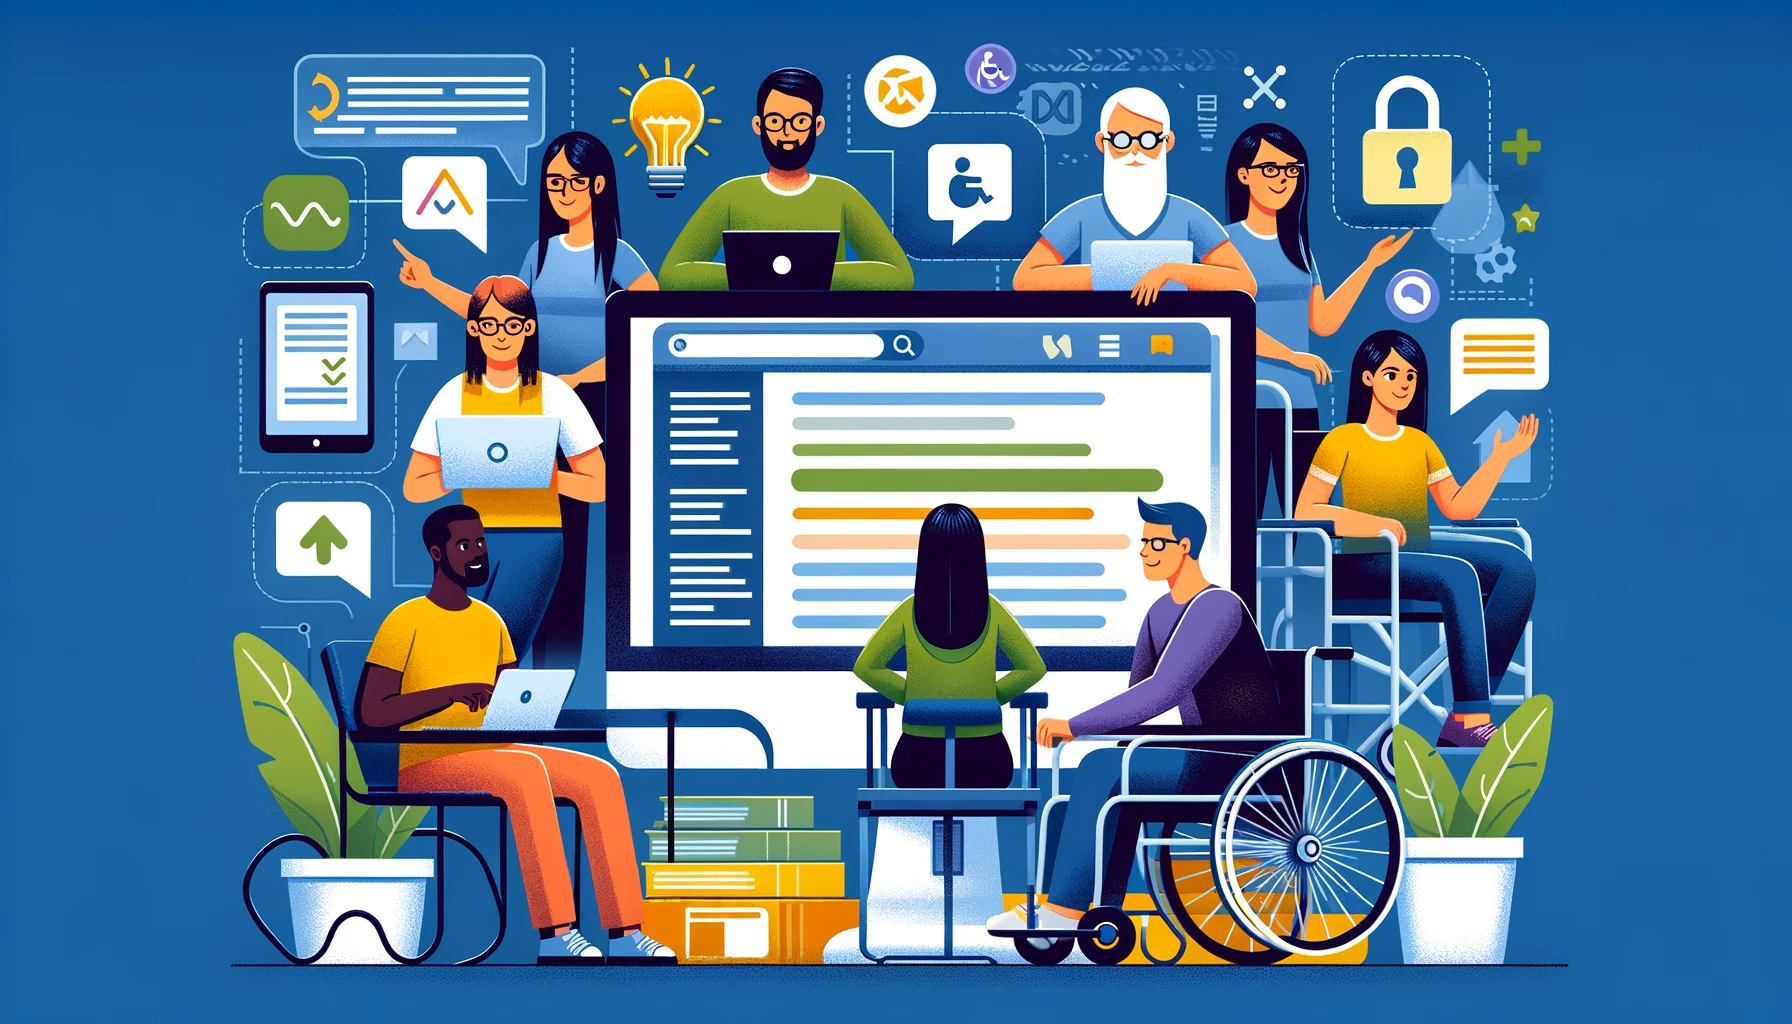 Web Accessibility Best Practices – How to Ensure Everyone Can Use Your Website